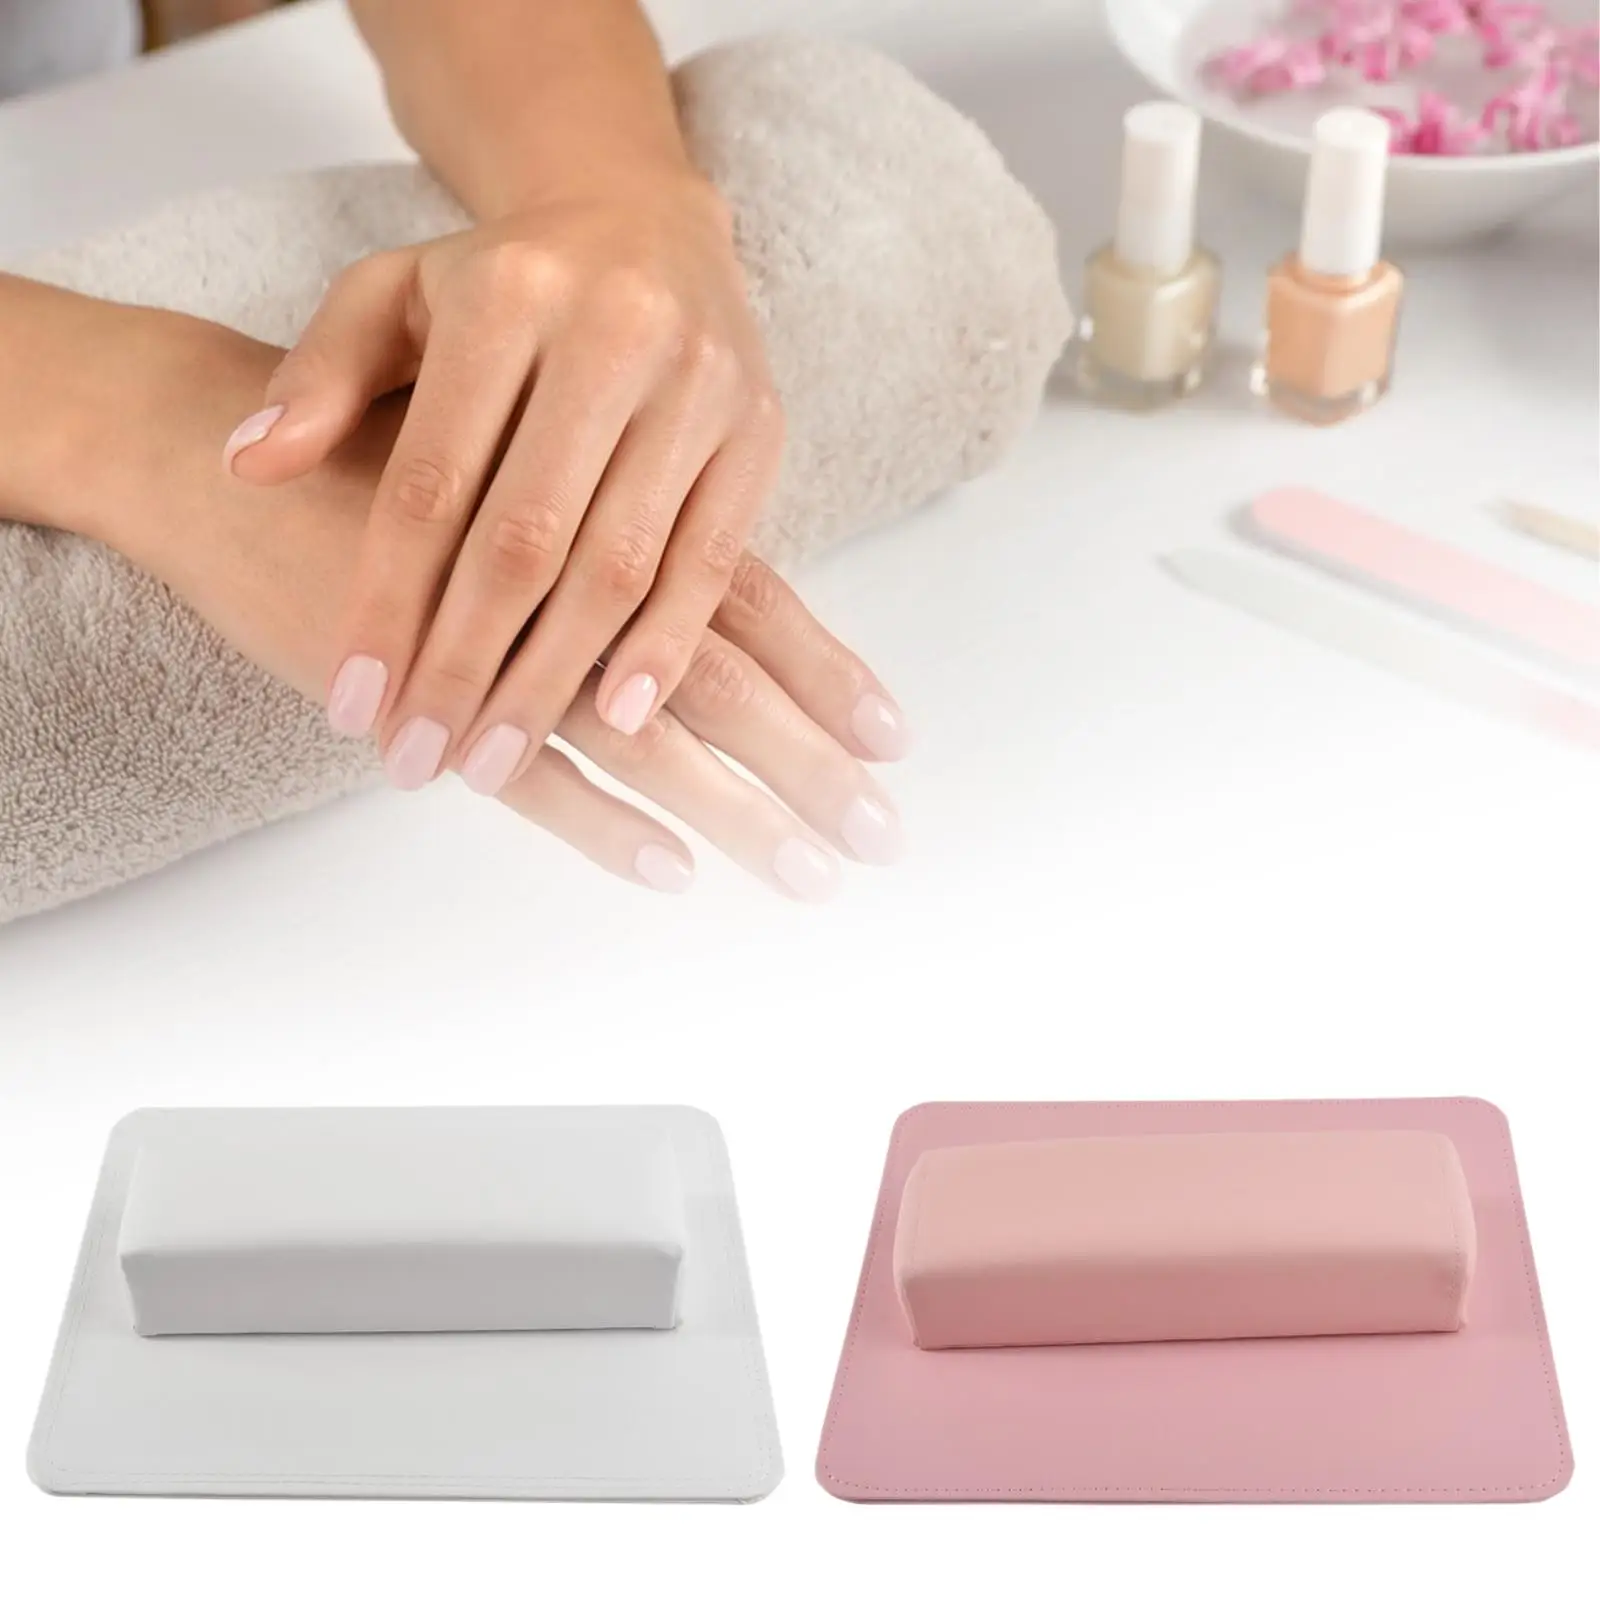 Nail Hand Pillow and Mat Set Comfortable PU Leather Manicure Tool Hand Cushion Nail Arm Rest Cushion for Salon Manicurist Home